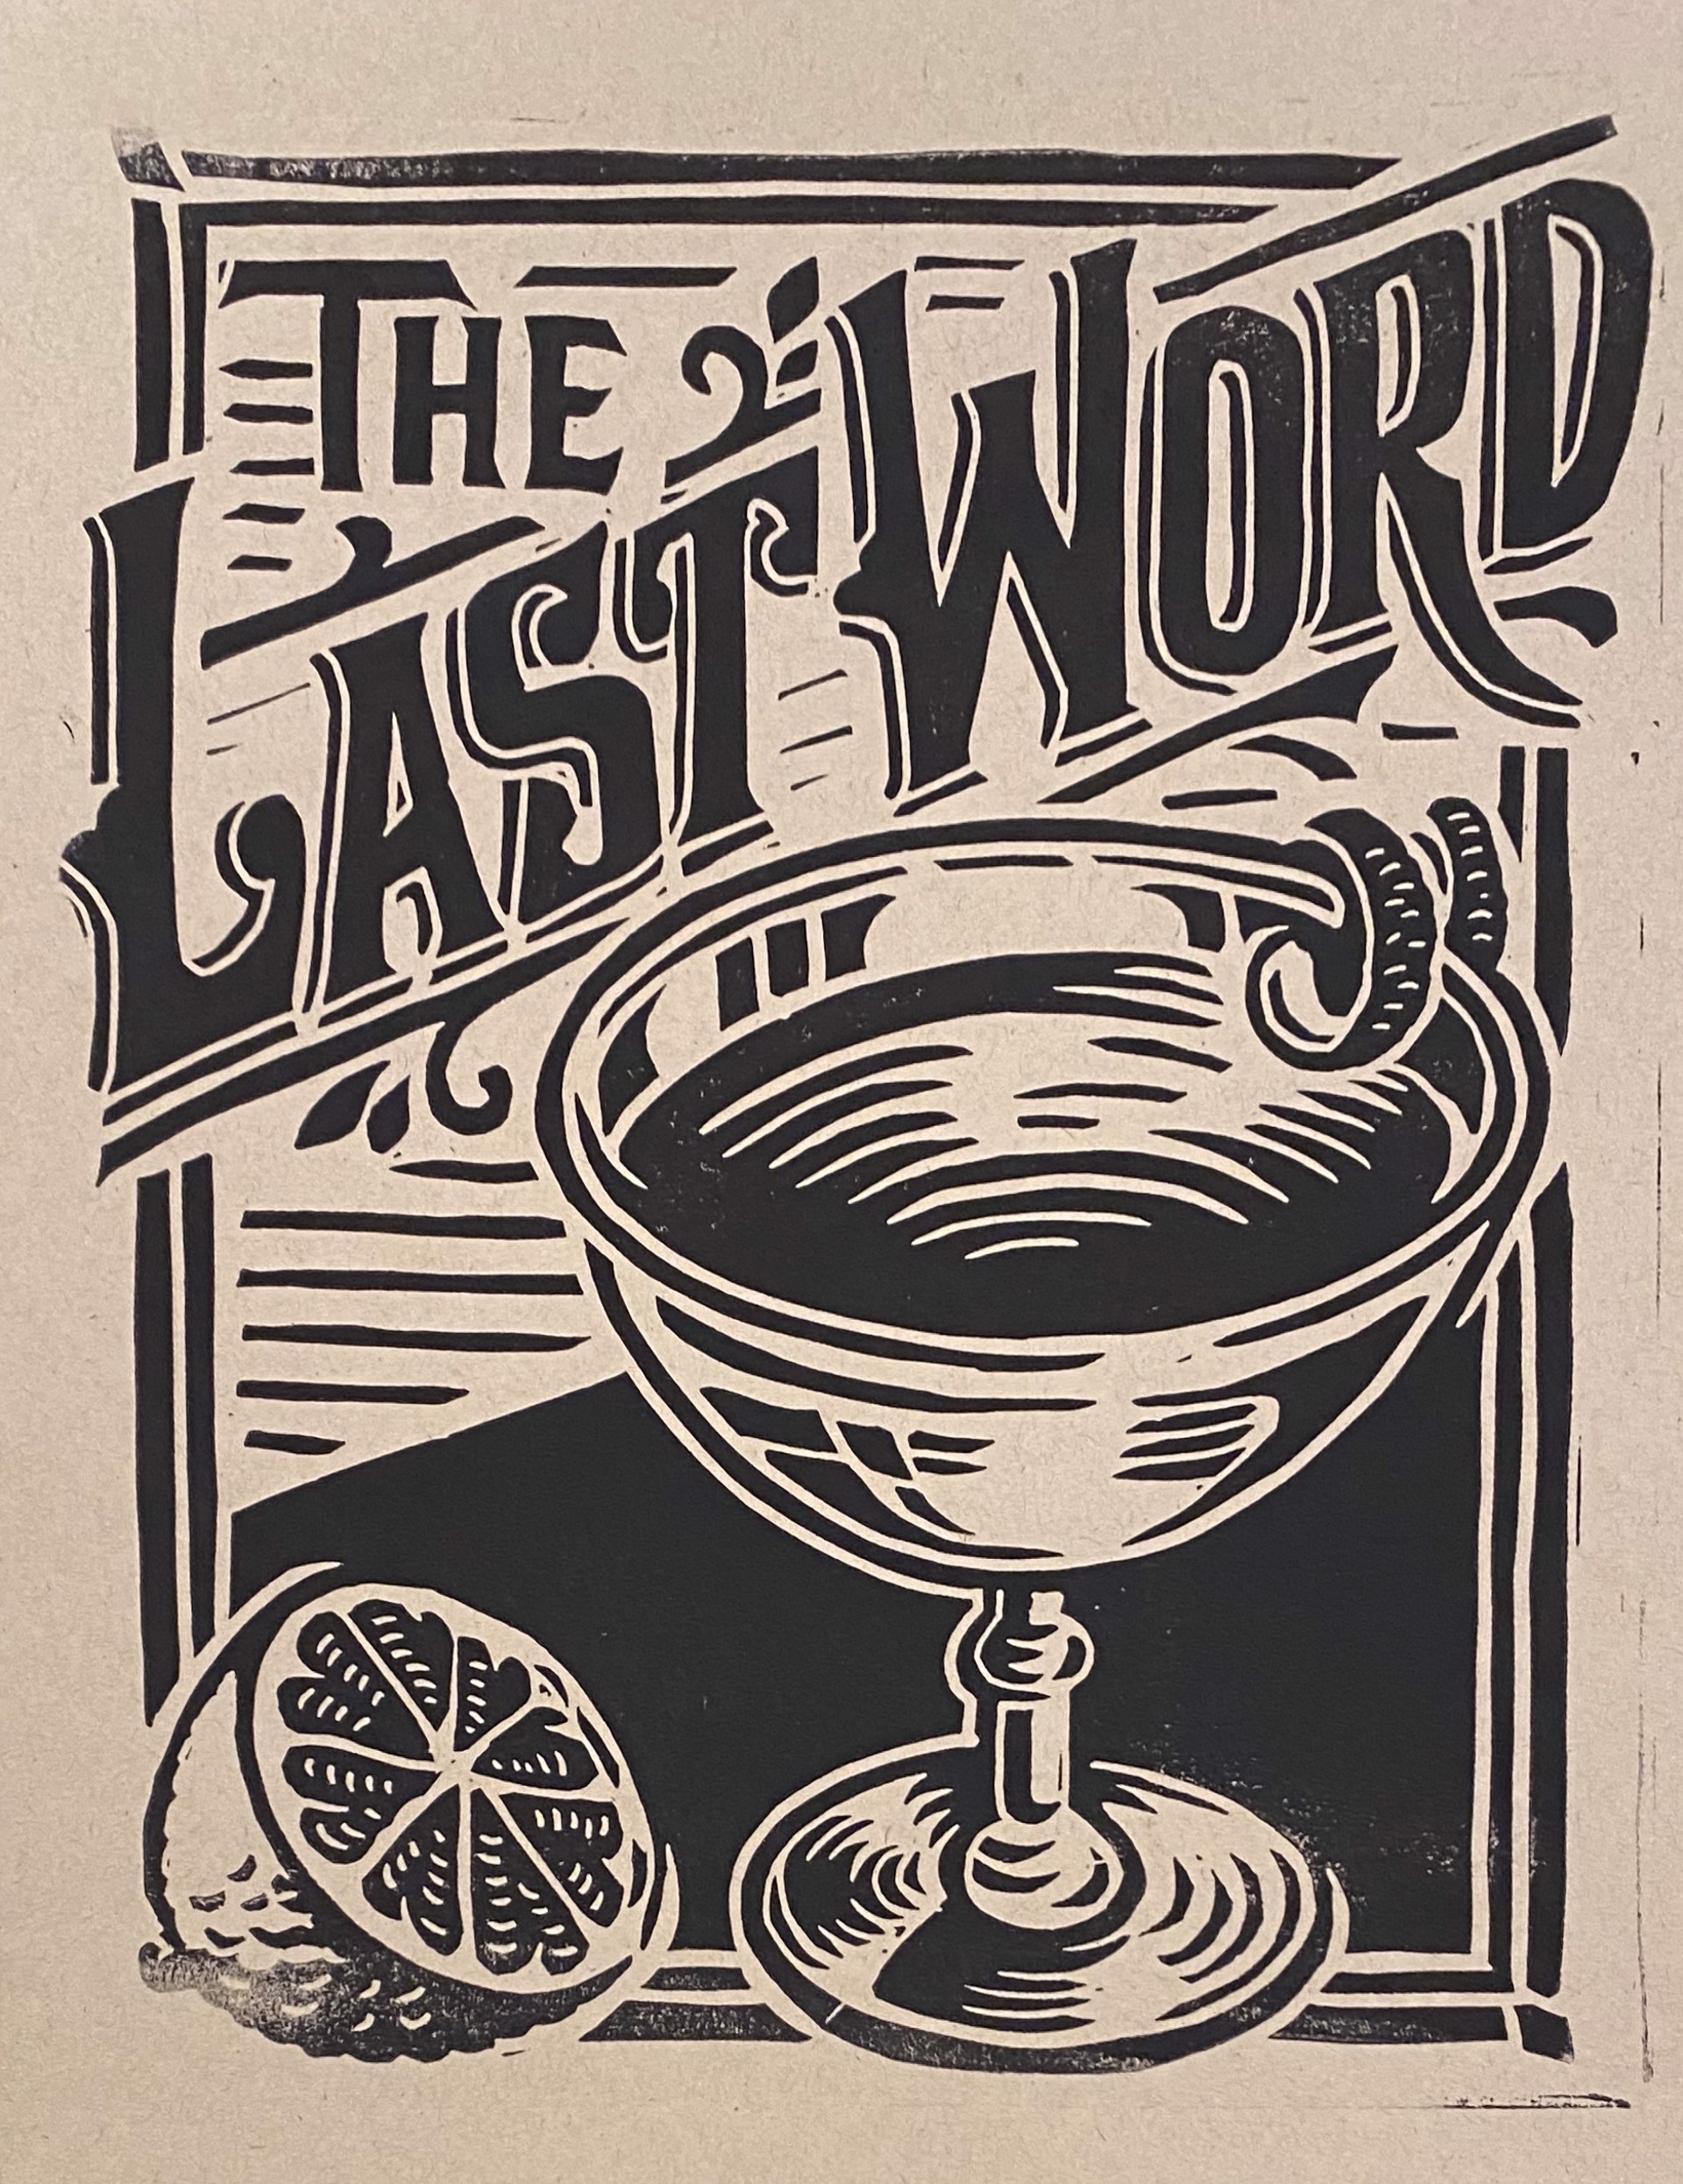 The Last Word by Derrick Castle